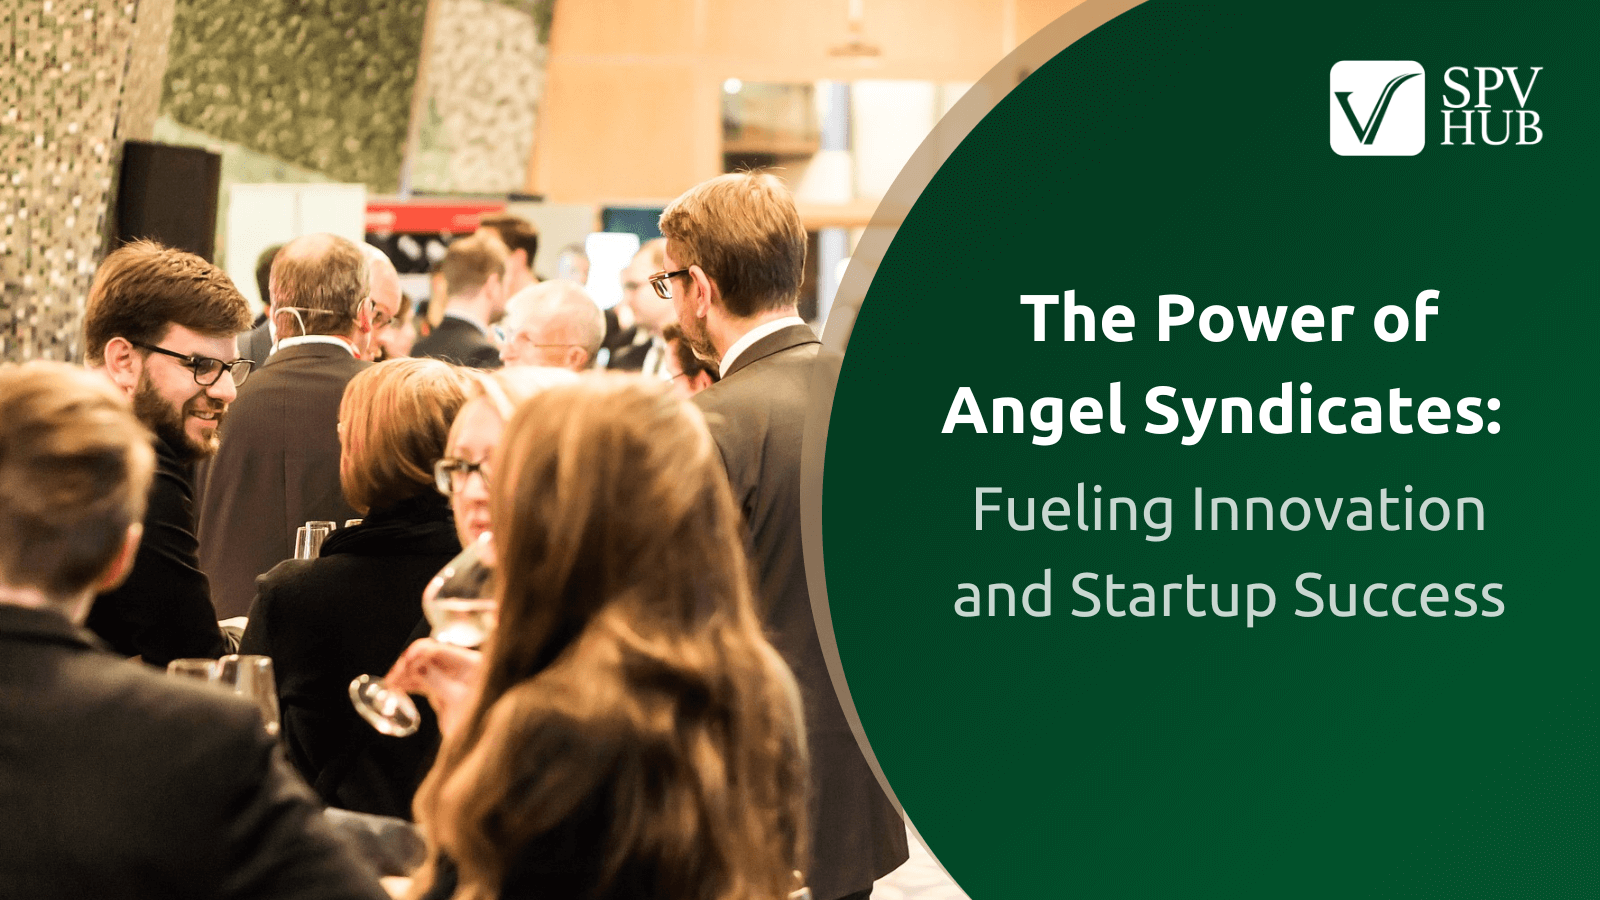 The Power of Angel Syndicates